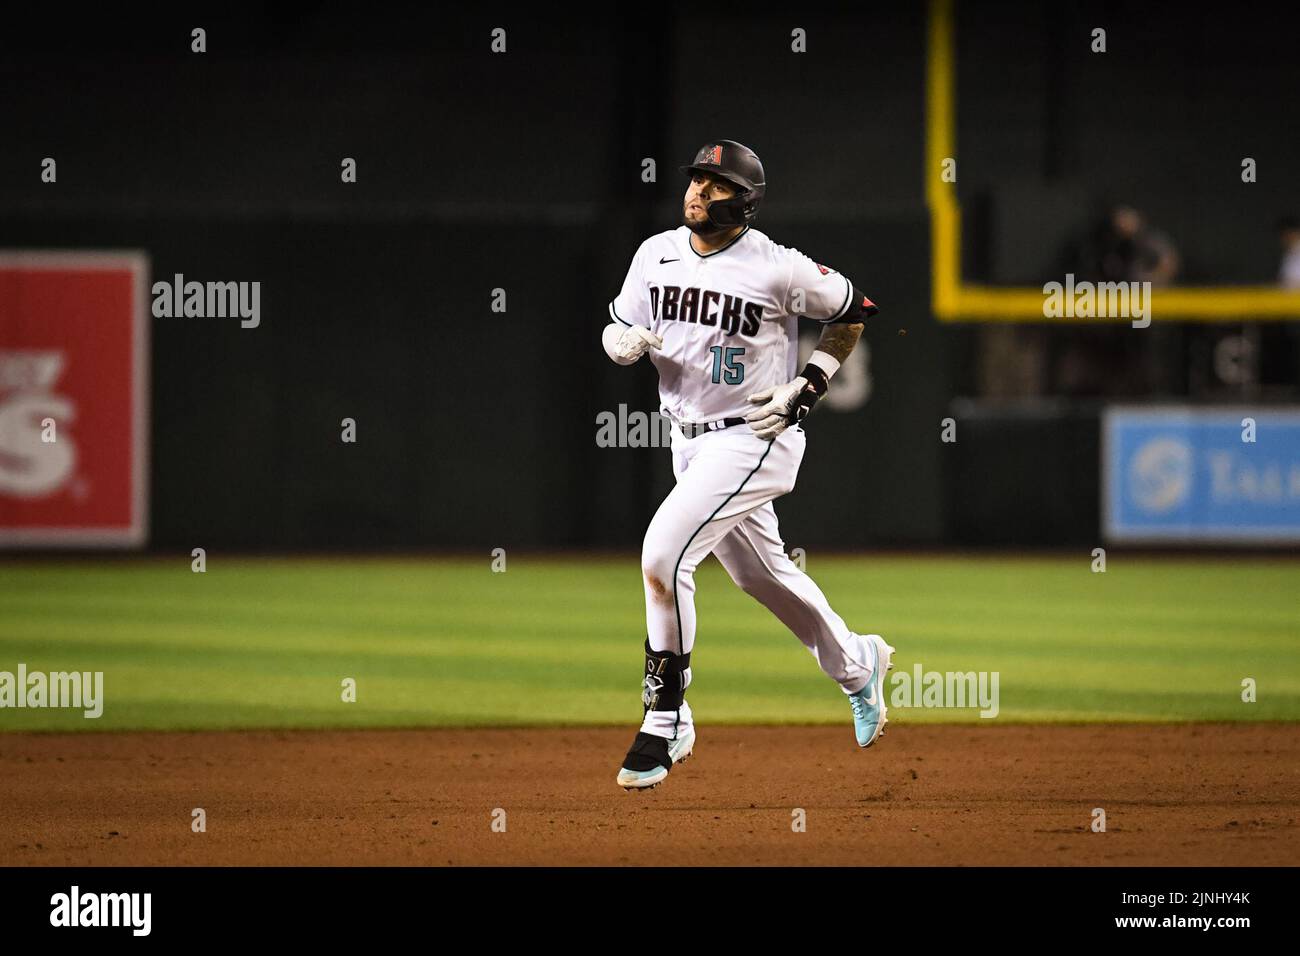 Phoenix, United States. 11th Aug, 2022. Arizona Diamondbacks third baseman Emmanuel Rivera (15) rounds second base after hitting a home run off Pittsburgh Pirates pitcher JT Brubaker (34) in the fourth inning during an MLB baseball game against the Pittsburgh Pirates on Thursday, August 11, 2022, in Phoenix, Arizona. The Diamondbacks defeated the Pirates 9-3. (Thomas Fernandez/Image of Sport) Photo via Credit: Newscom/Alamy Live News Stock Photo